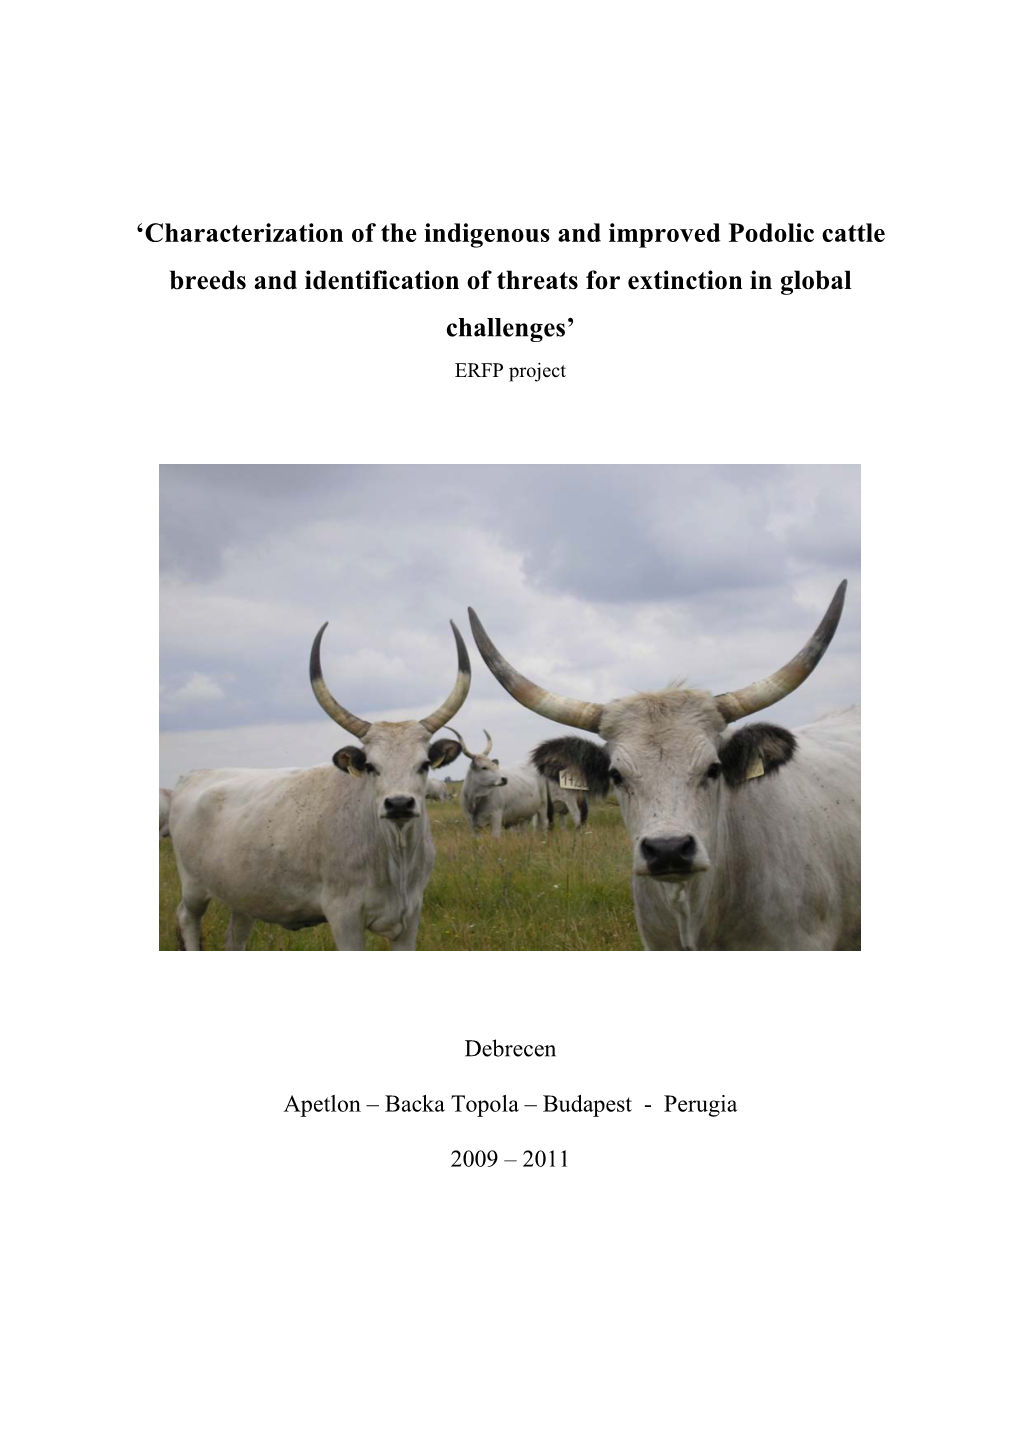 'Characterization of the Indigenous and Improved Podolic Cattle Breeds